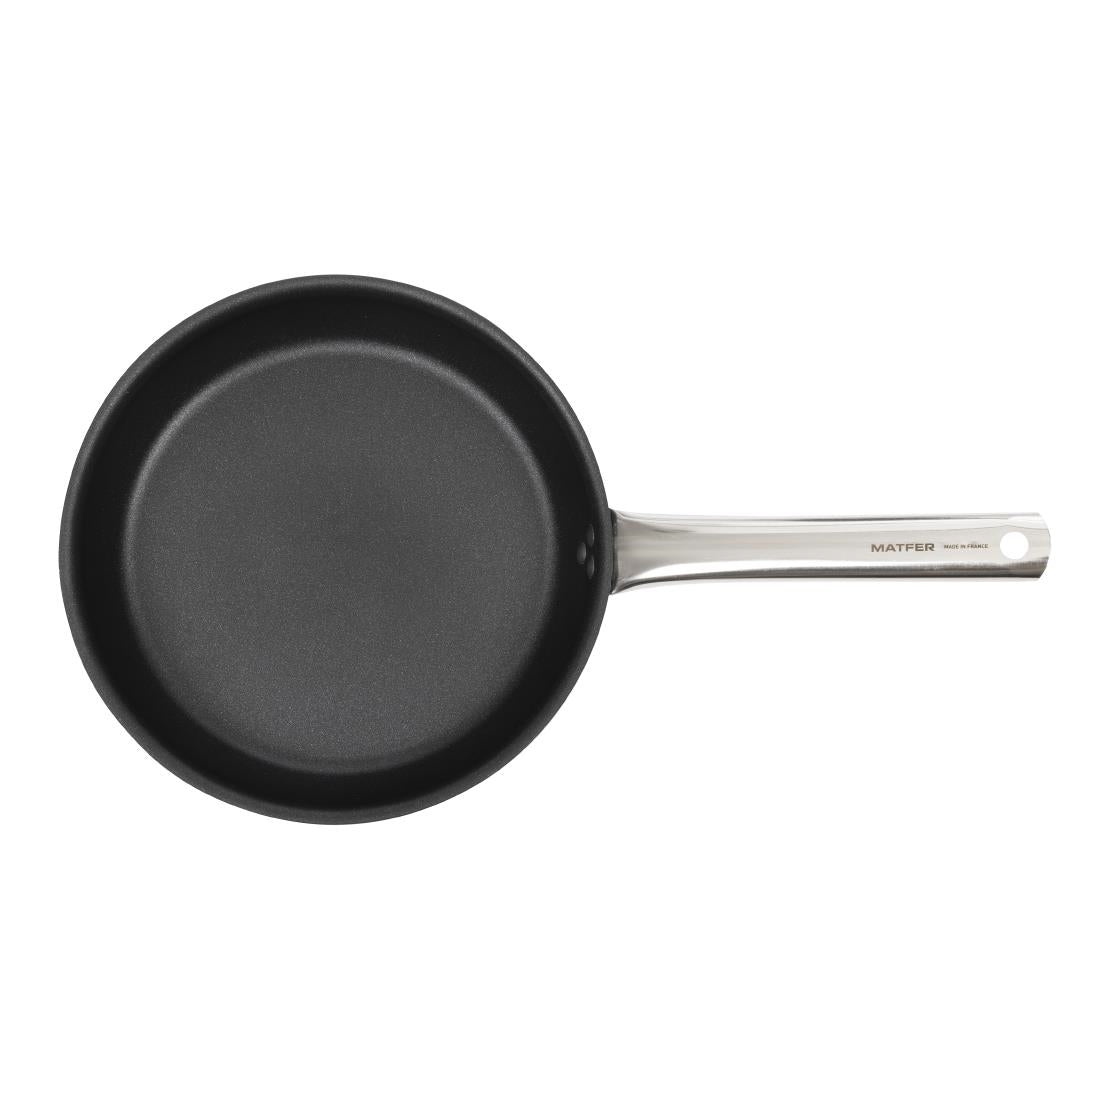 Bourgeat Elite Pro Non Stick Induction Frying Pan 280mm JD Catering Equipment Solutions Ltd